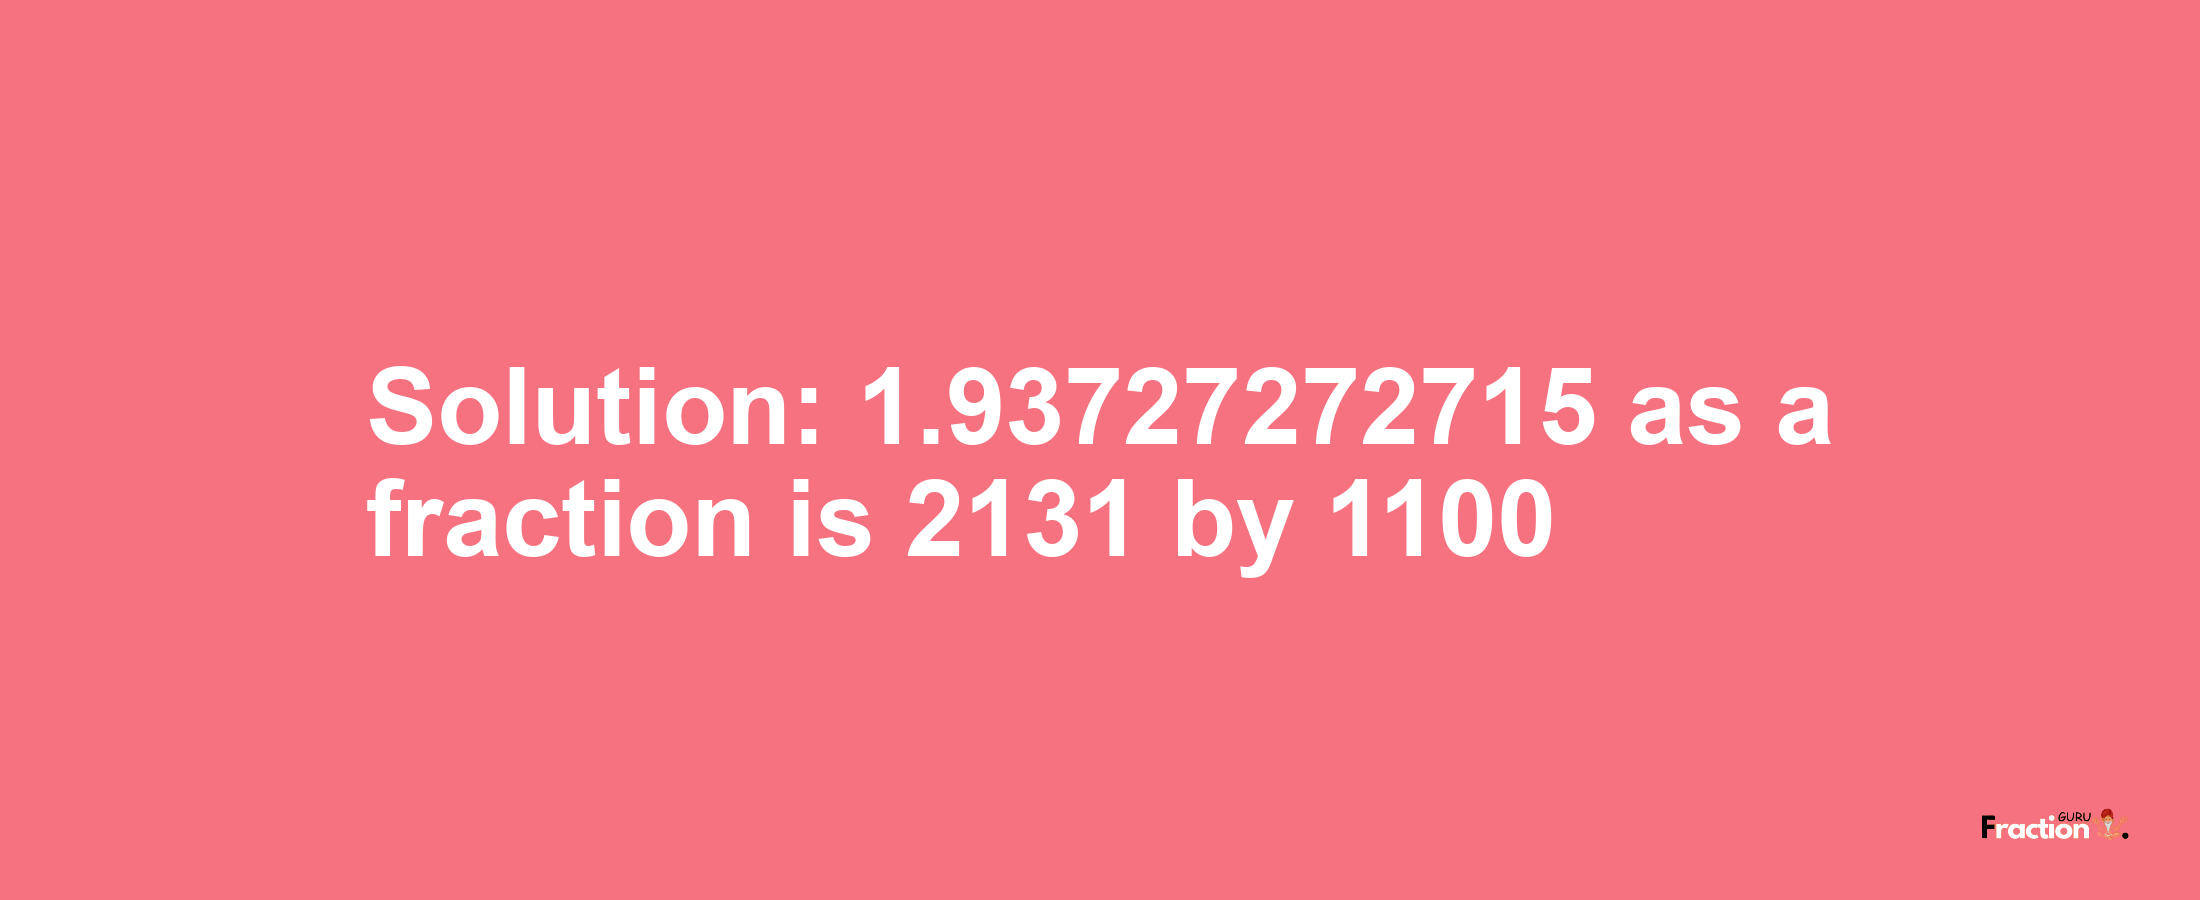 Solution:1.93727272715 as a fraction is 2131/1100